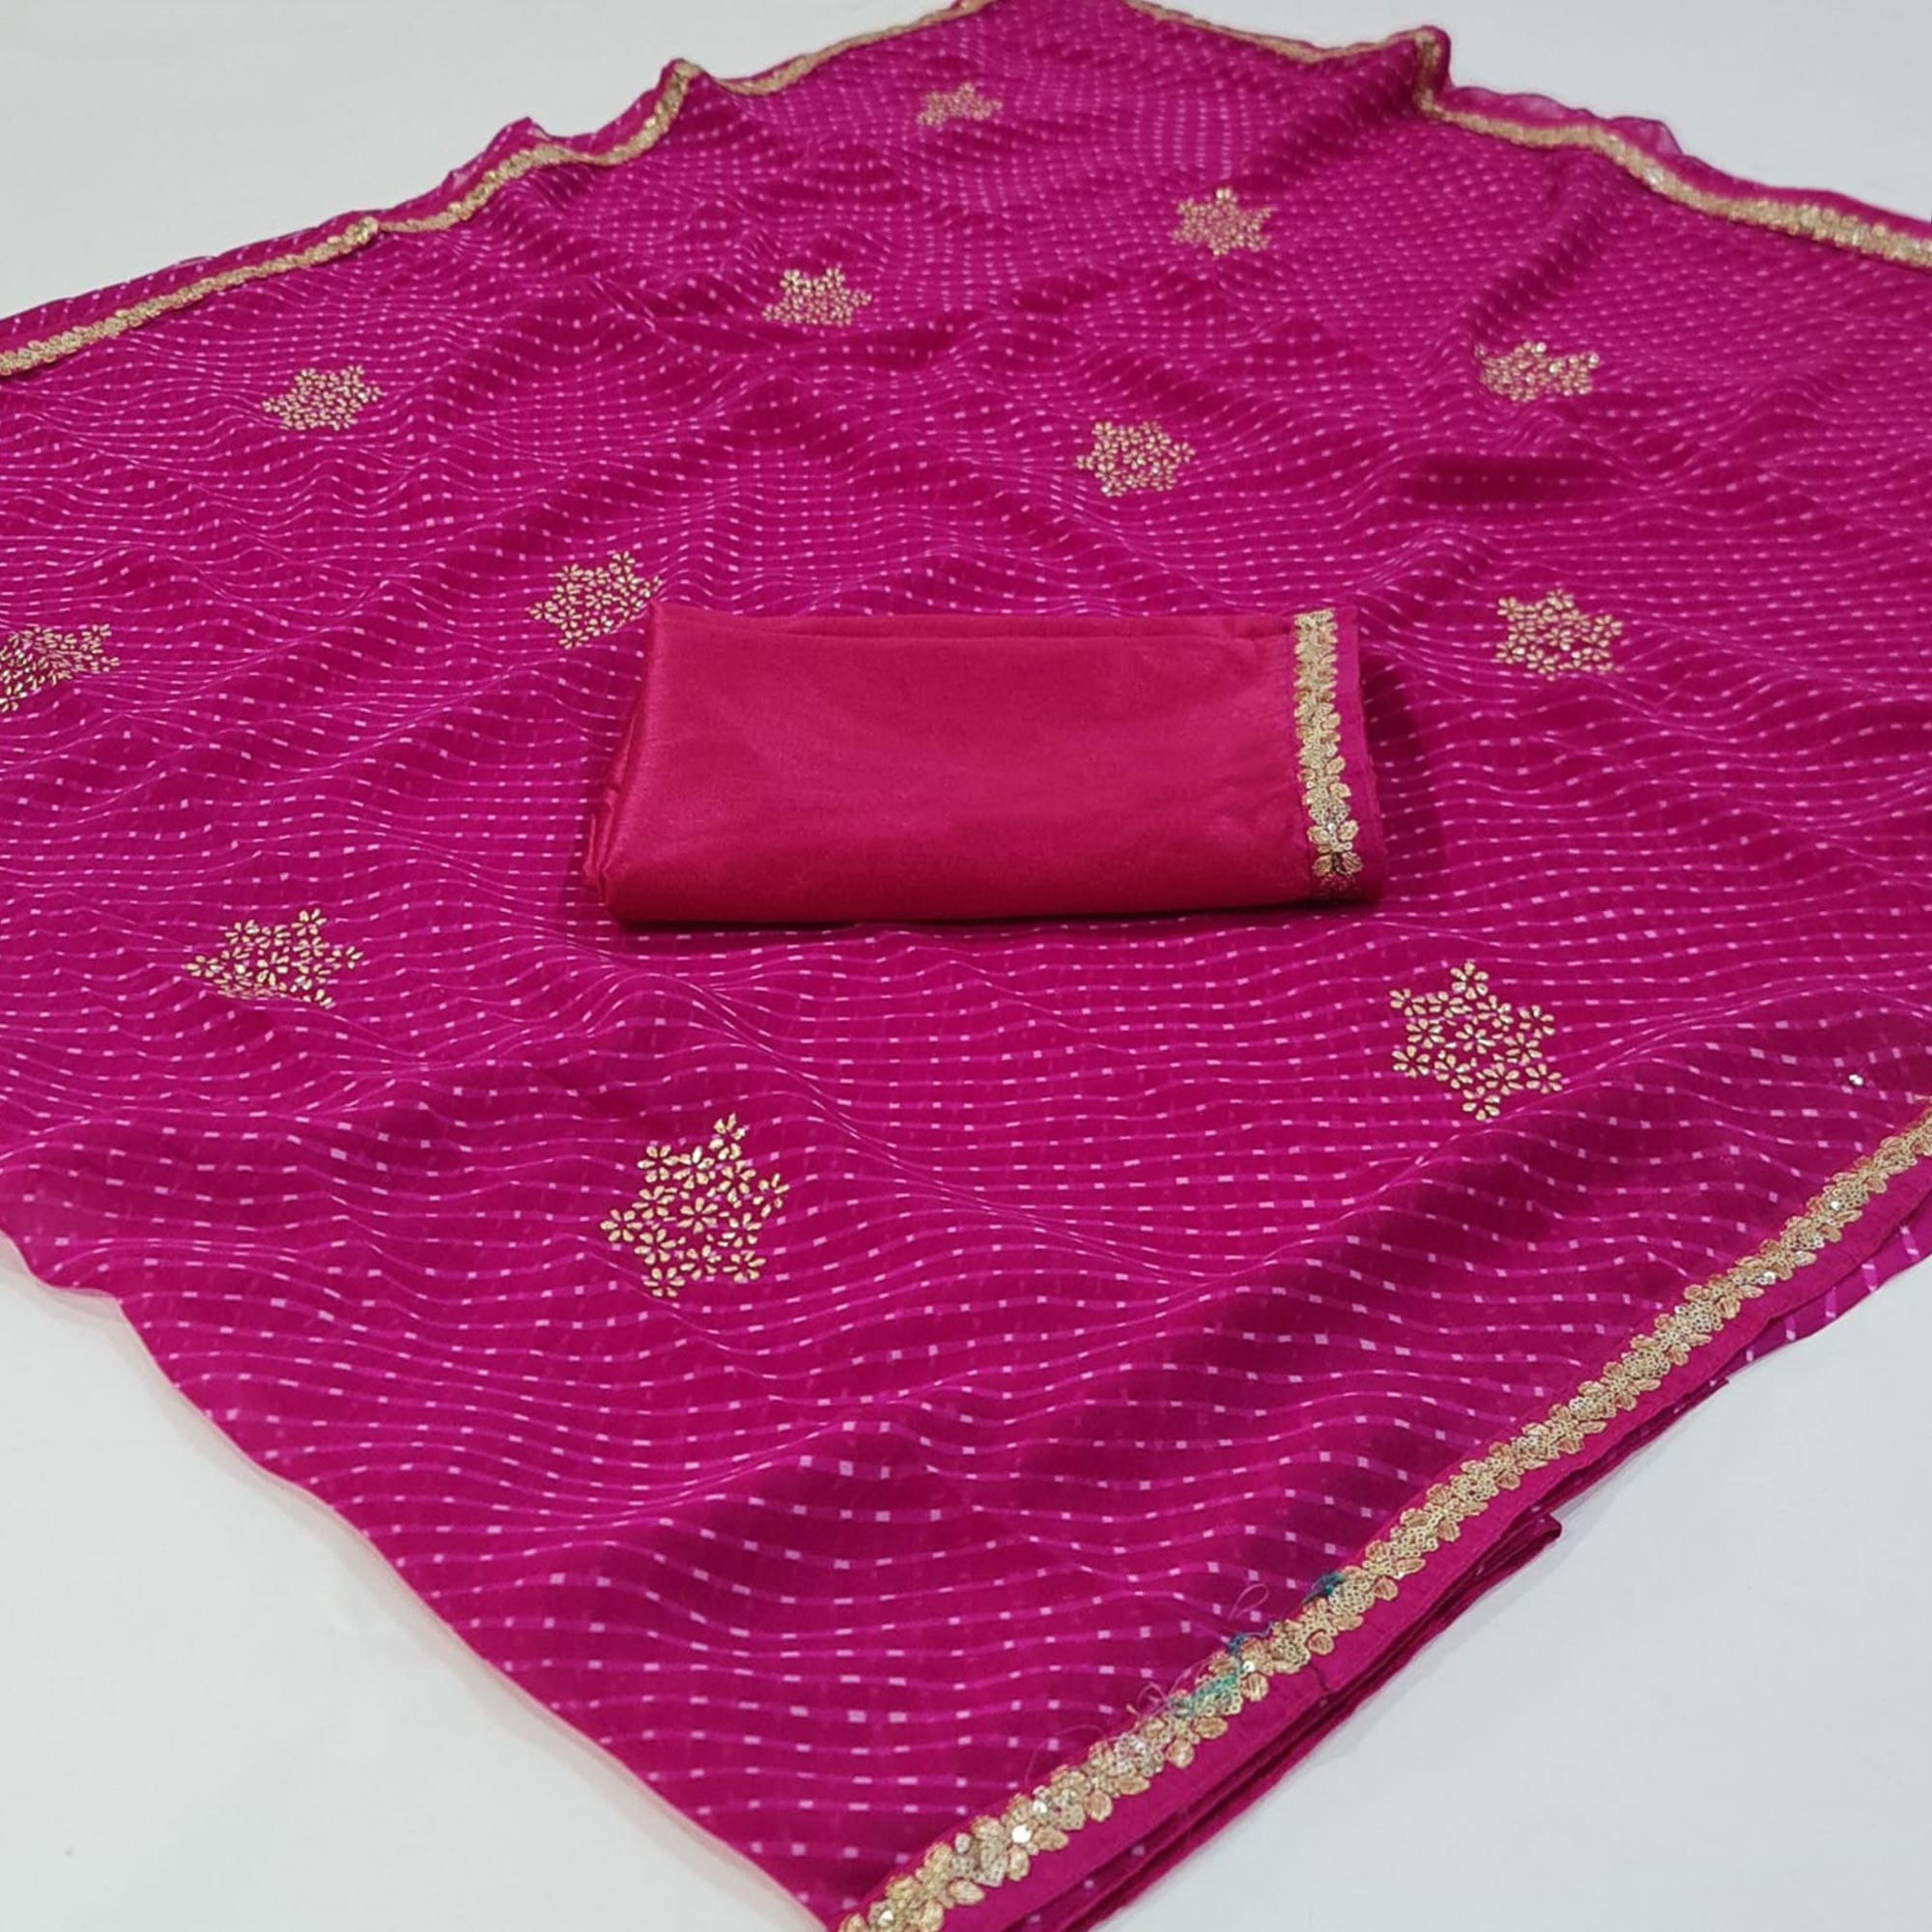 Rani Pink Printed Georgette Saree With lace Border